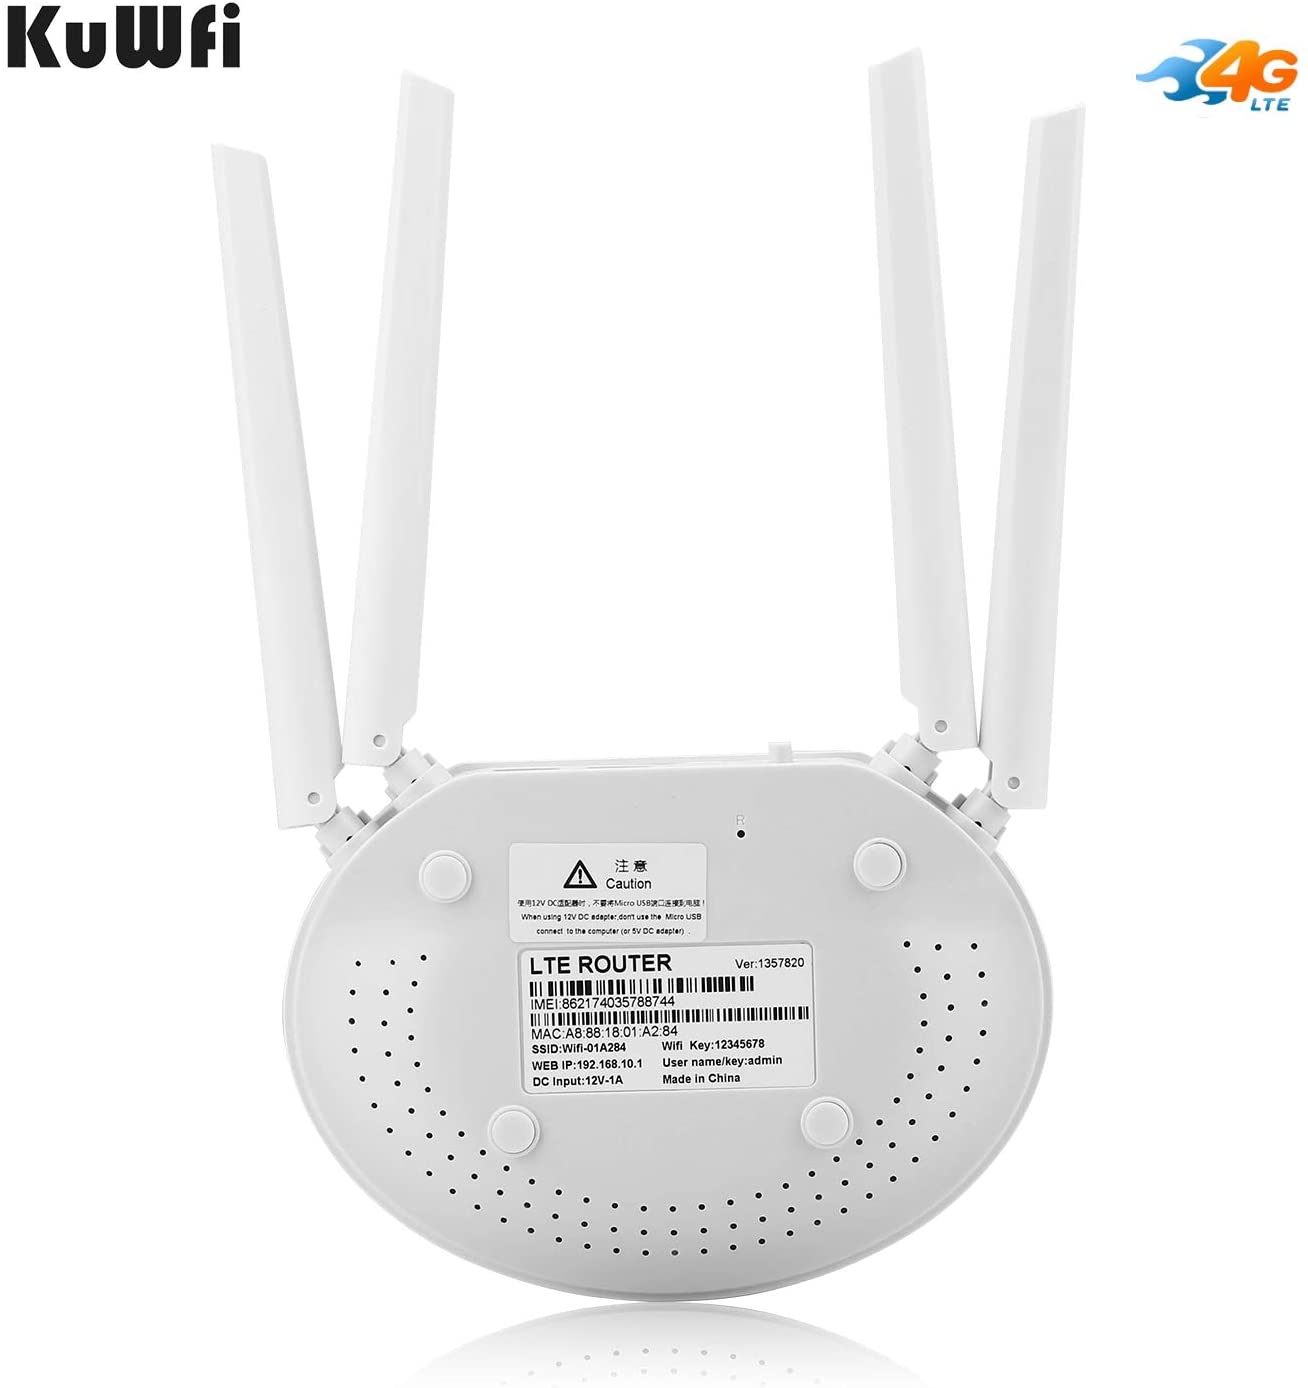 wireless router KuWFi 4G LTE SIM Router Wireless WiFi Internet 300Mbps  Unlocked with 4pcs Non-Detachable Antennas Mobile WiFi Hotspot support  network